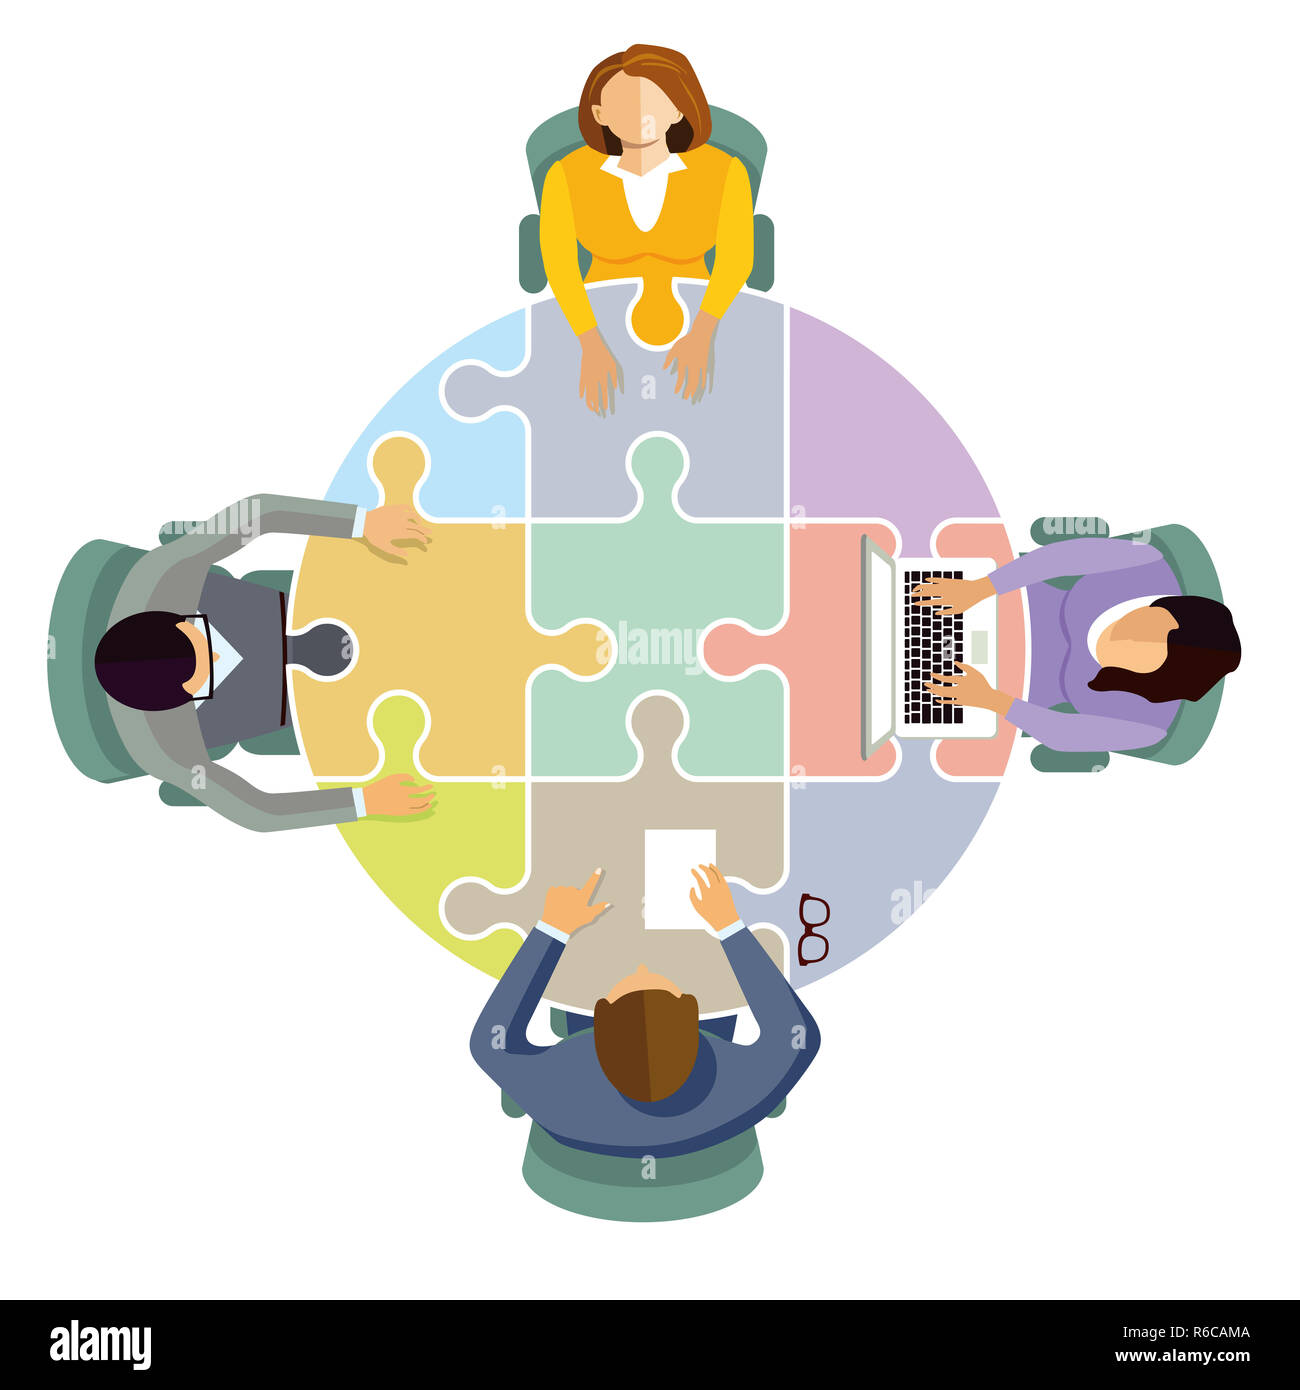 team collaboration and connect,illustration Stock Photo